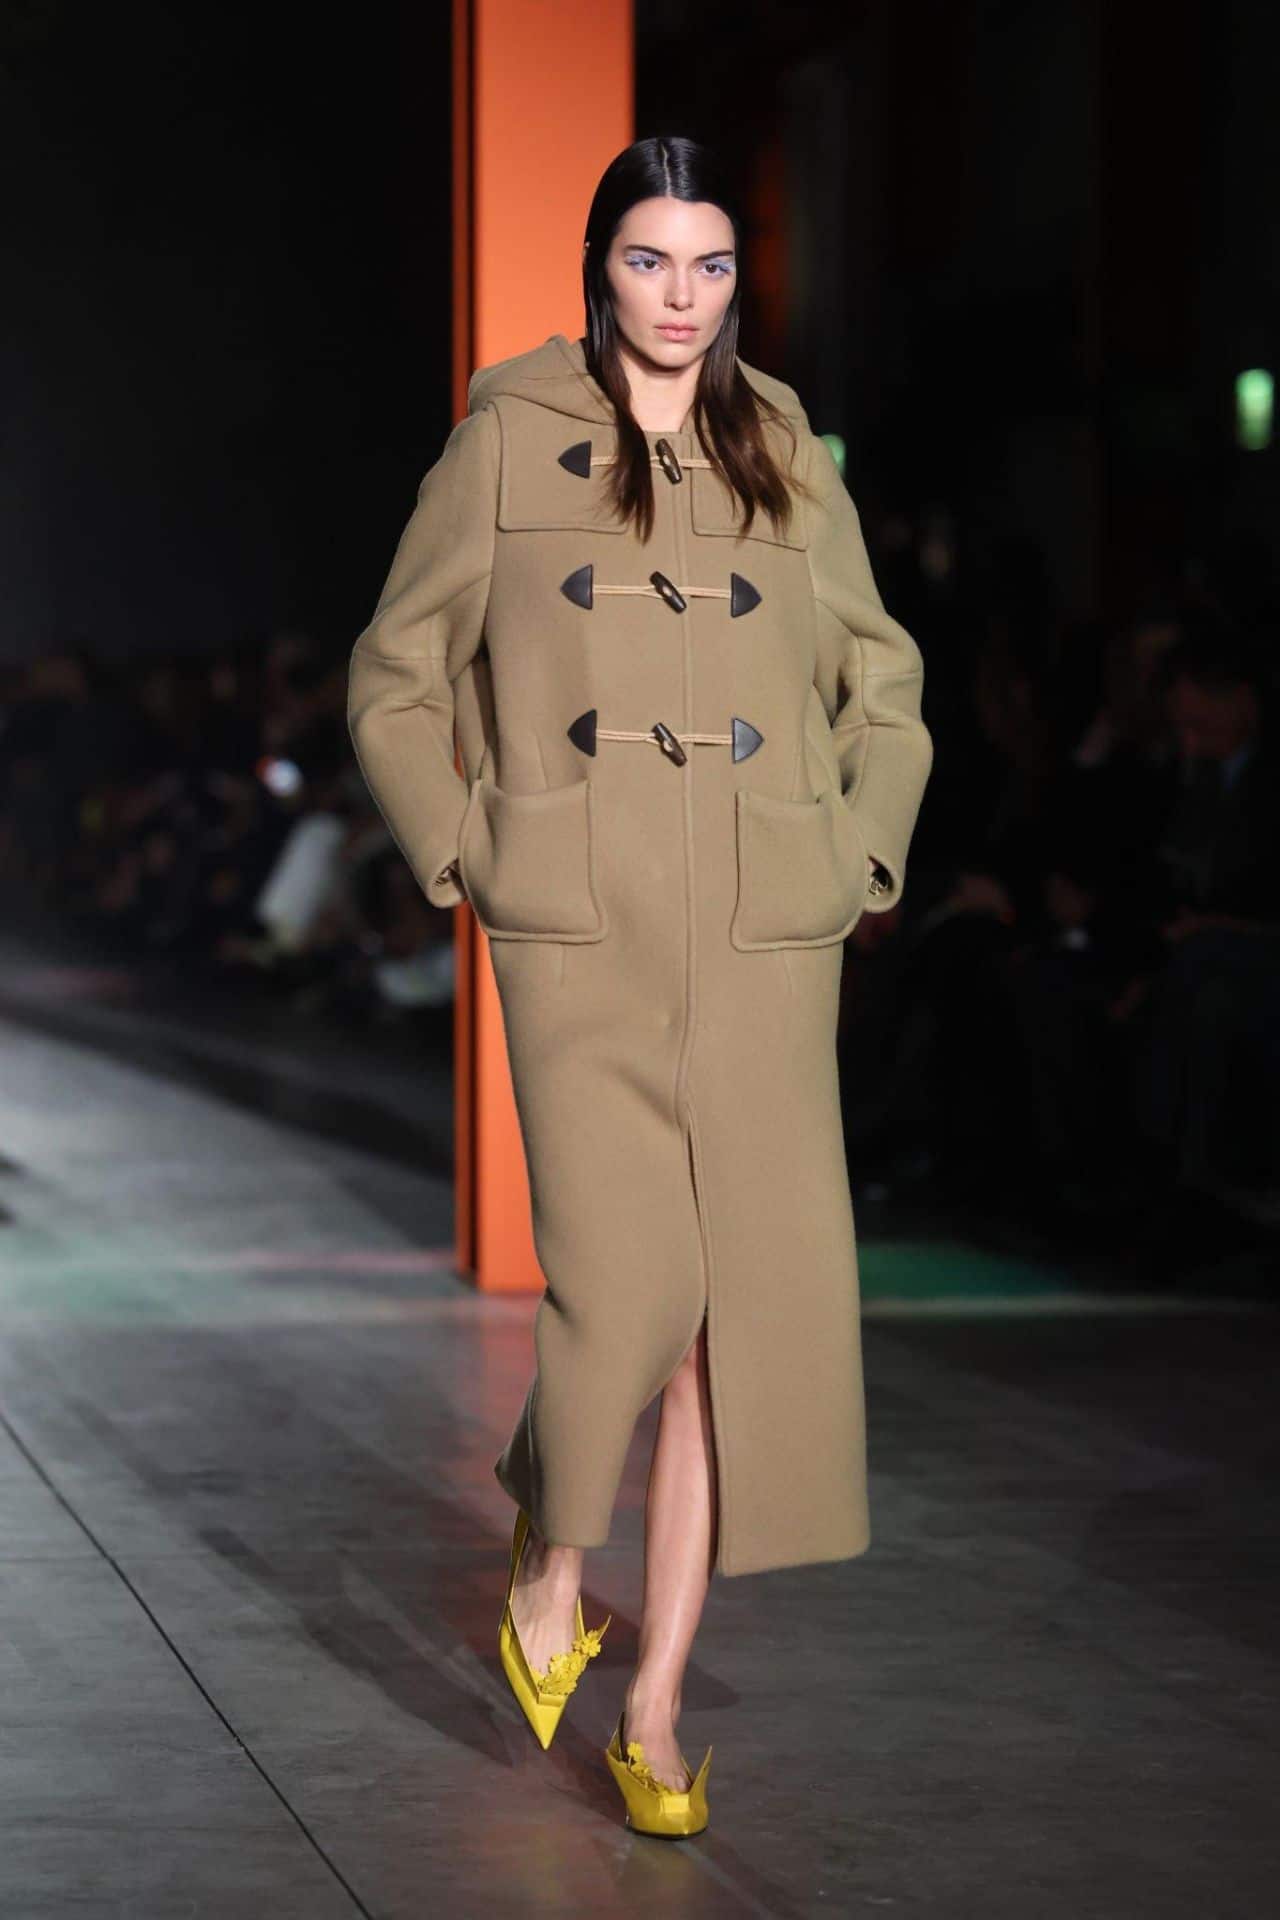 Kendall Jenner Stuns in Camel Coat and Origami Heels at Prada Show in Milan